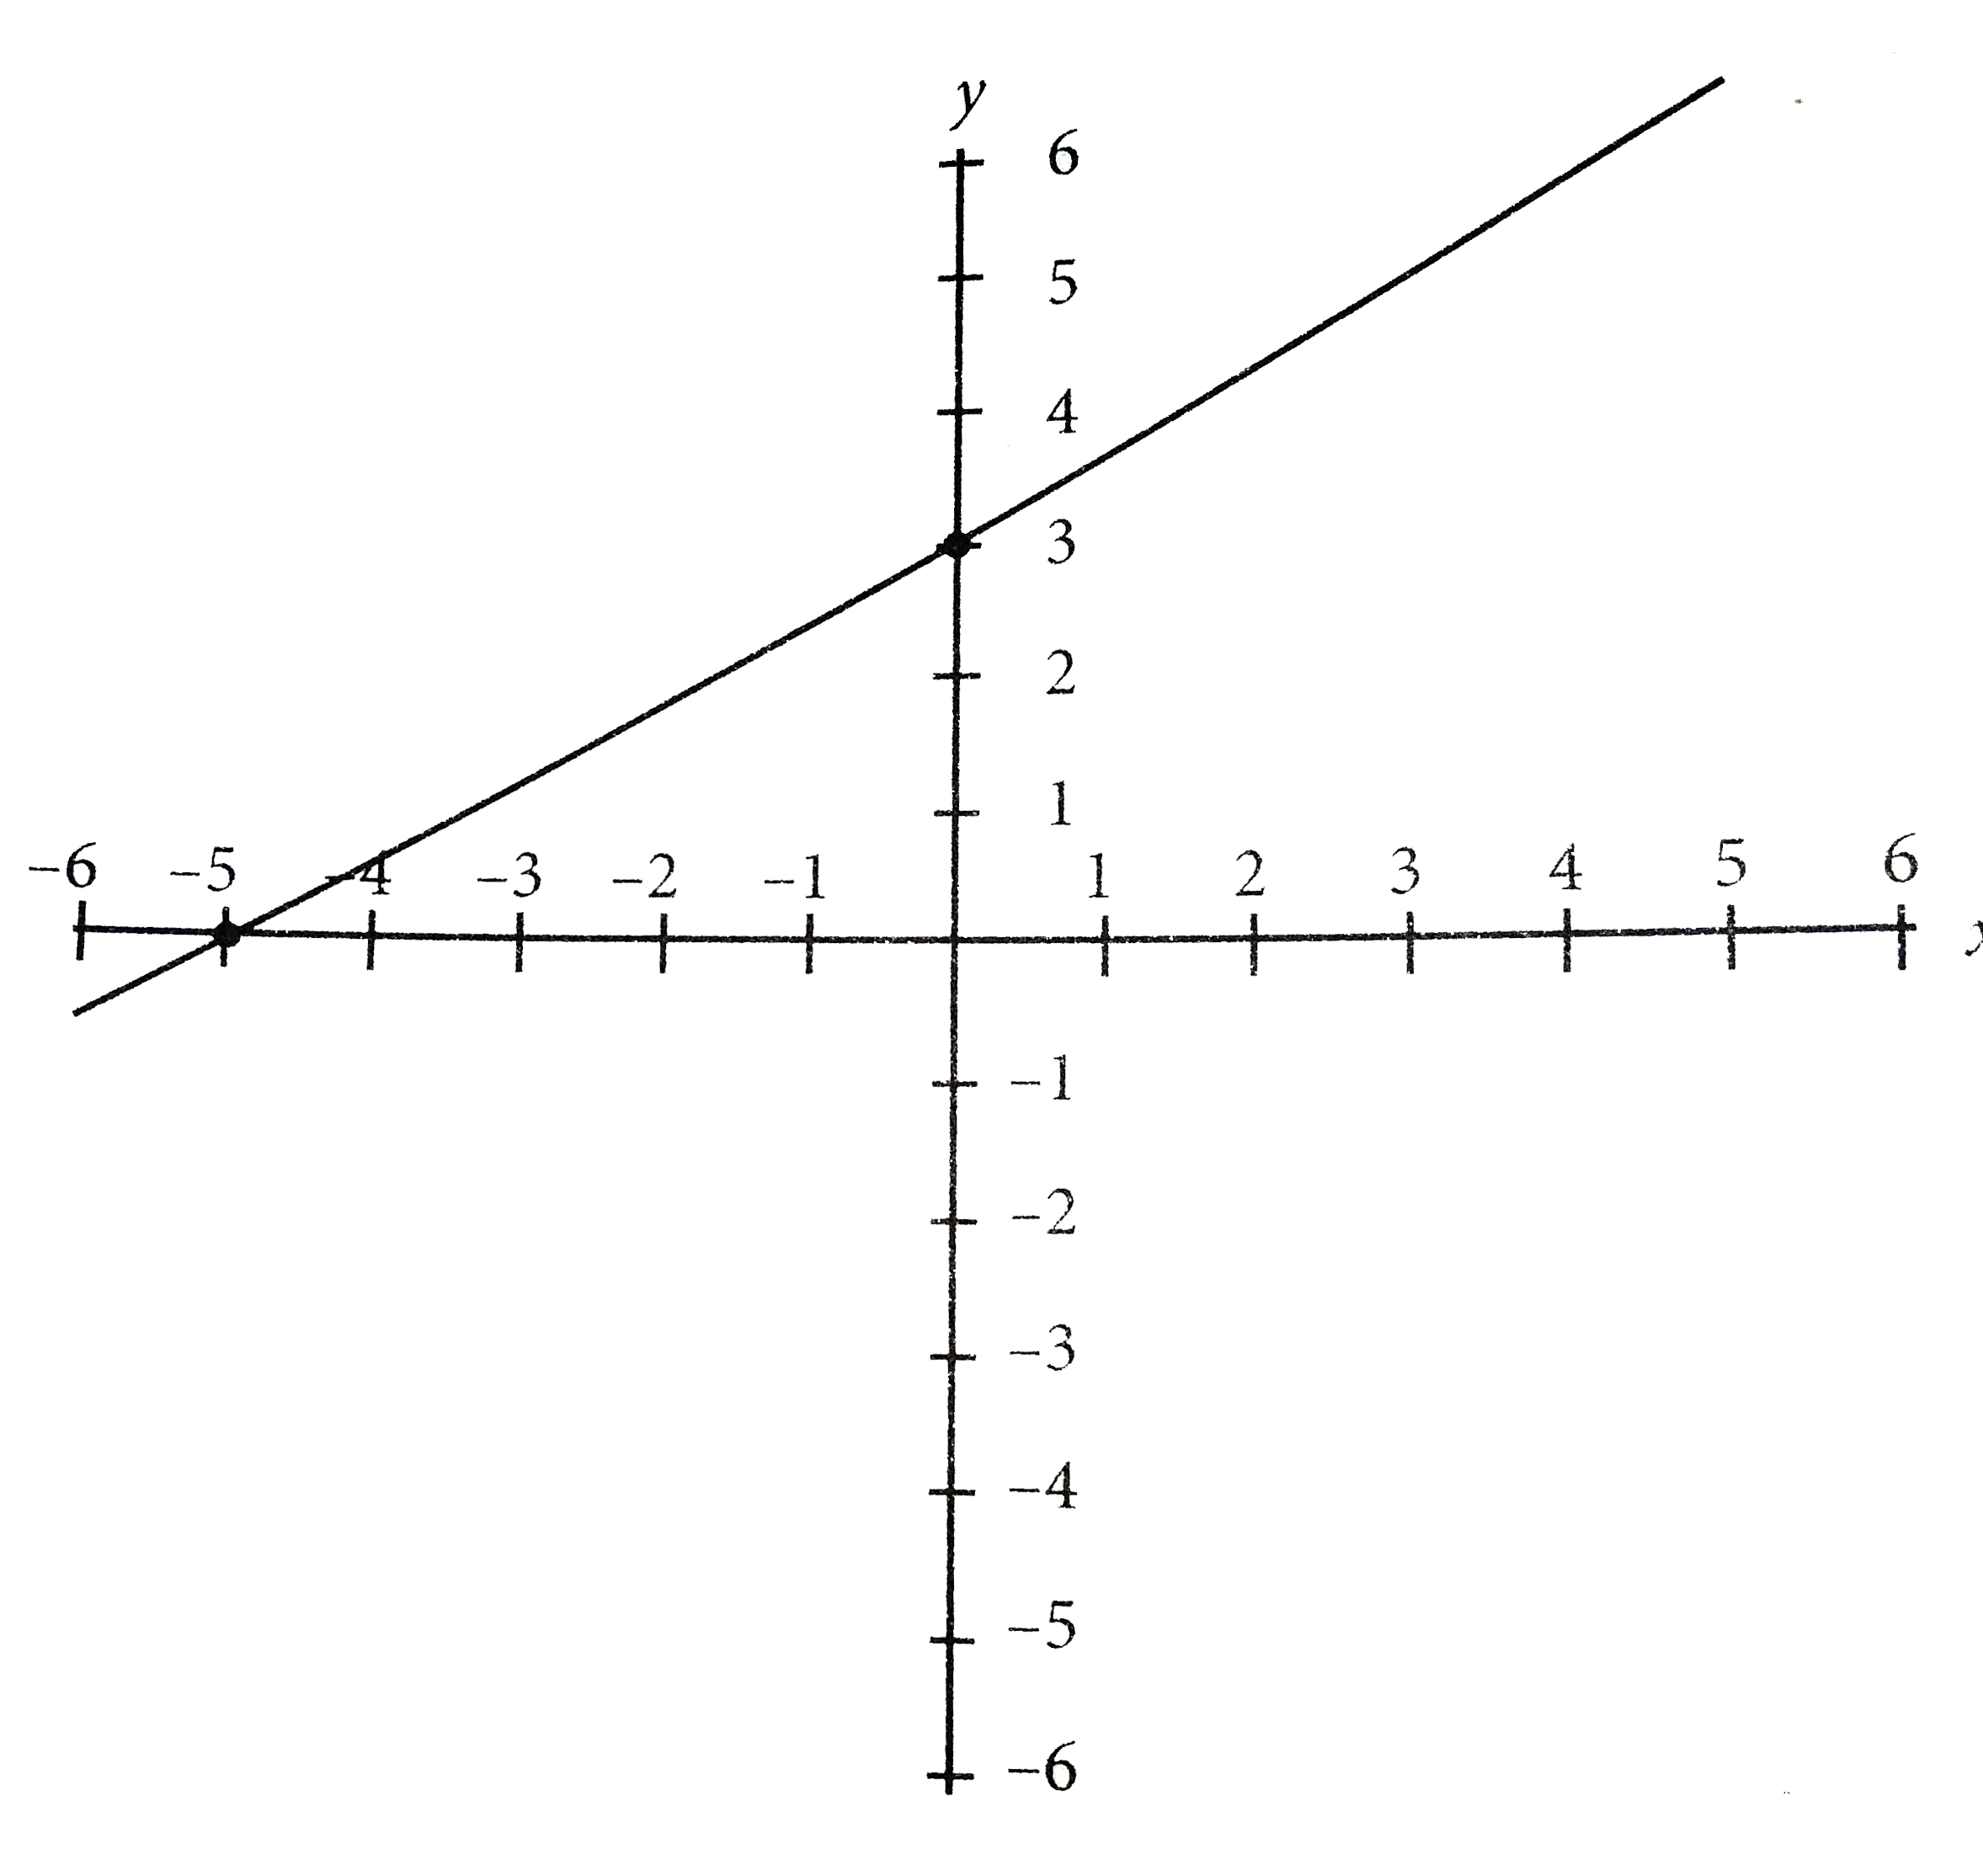 In the figure above, of y=f(x) is shown. Which of the following could be the equation of f(x)?